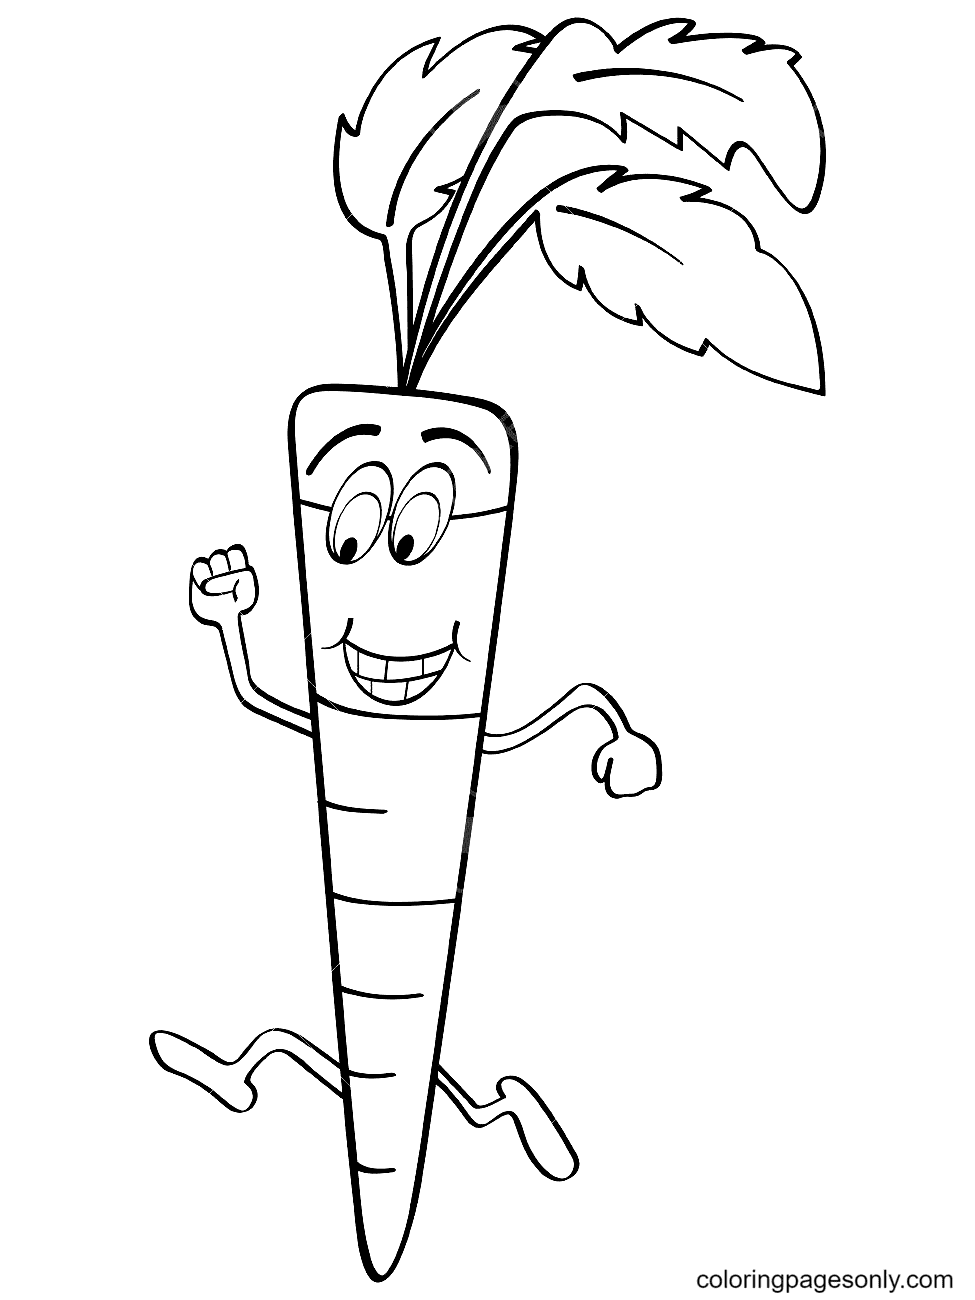 Funny Carrot Printable Coloring Page